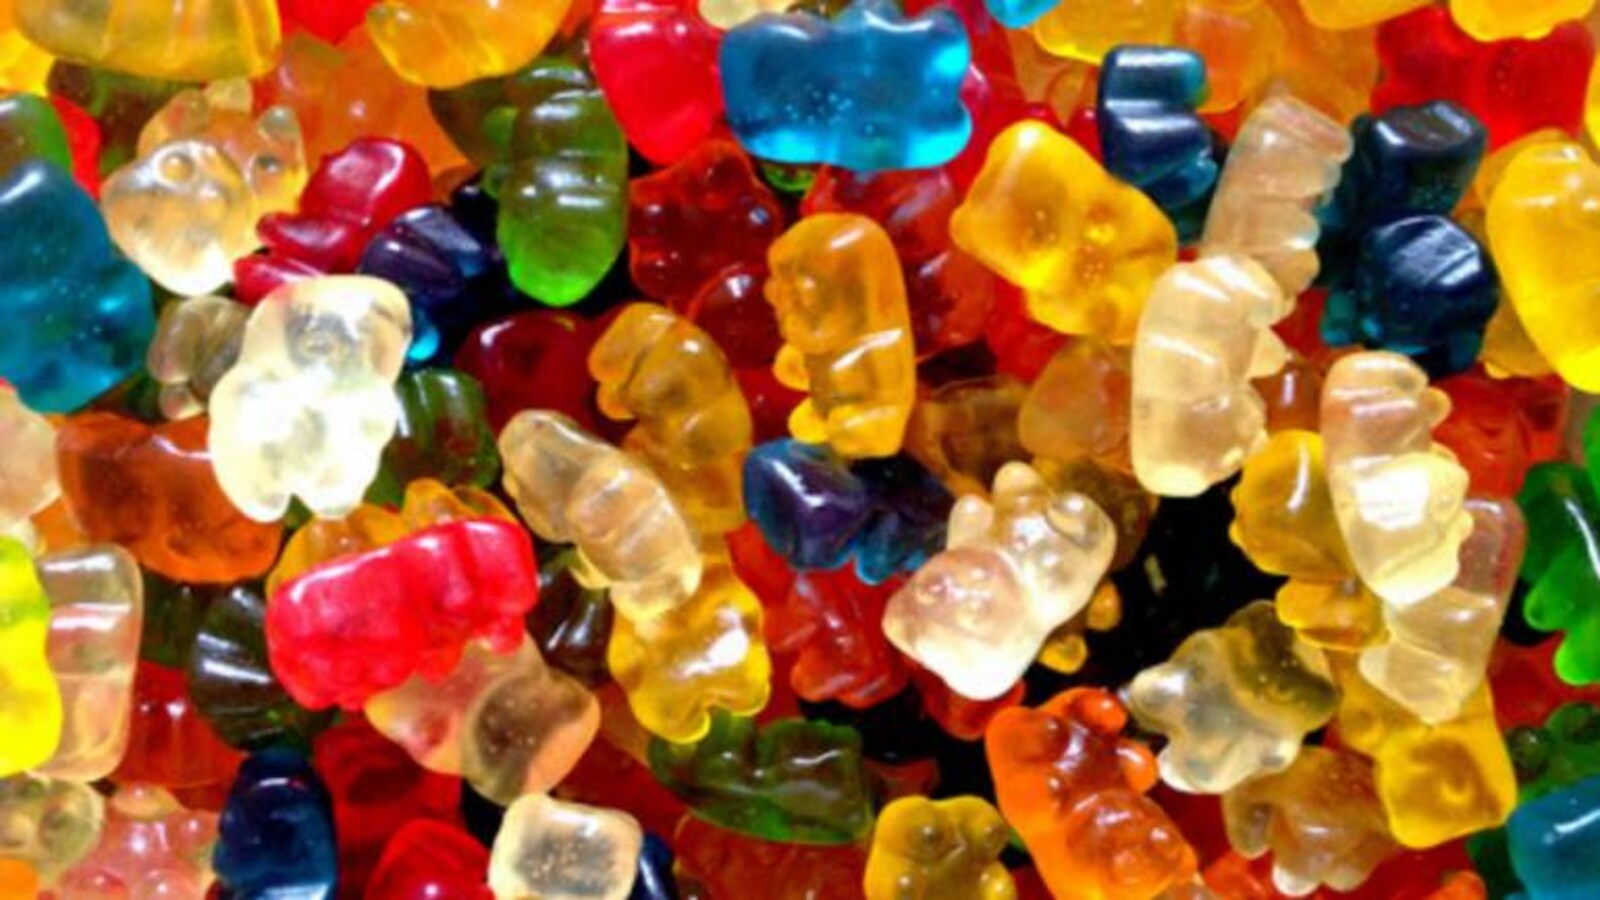 Haribo Rewards Man Who Found Its $4.8 Million Check with Candy